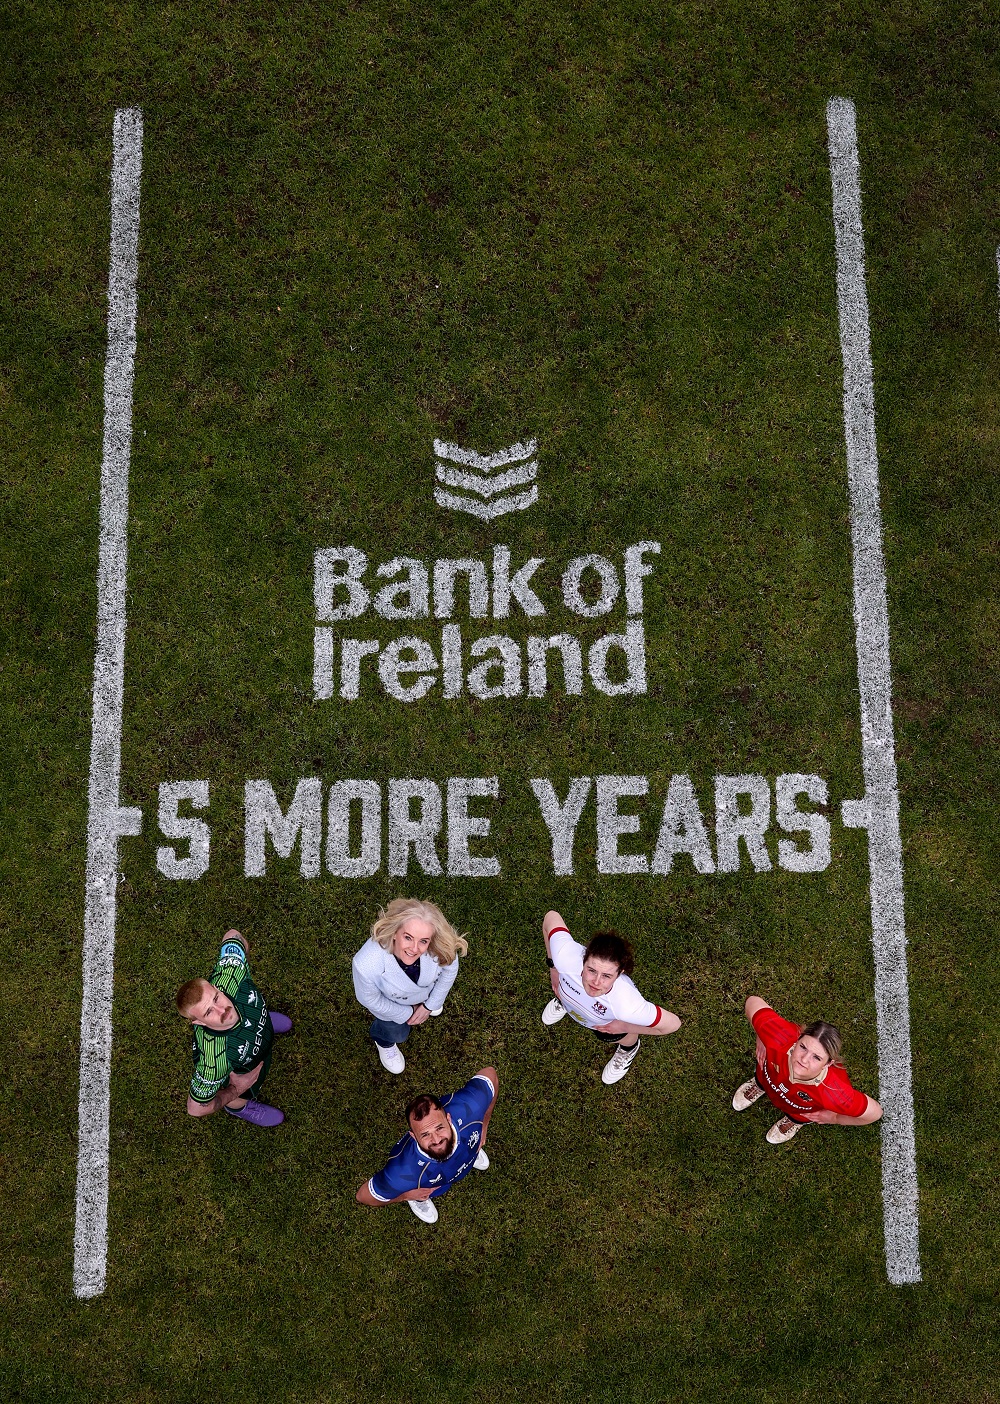 Bank of Ireland today announced new five-year extensions of its sponsorships of the four Irish Rugby provinces, reaffirming its long-standing commitment to the game across all levels in Connacht, Leinster, Munster and Ulster. The new agreements, all to run until 2028, represent the most comprehensive sponsorship of Men’s and Women’s sport in Ireland.